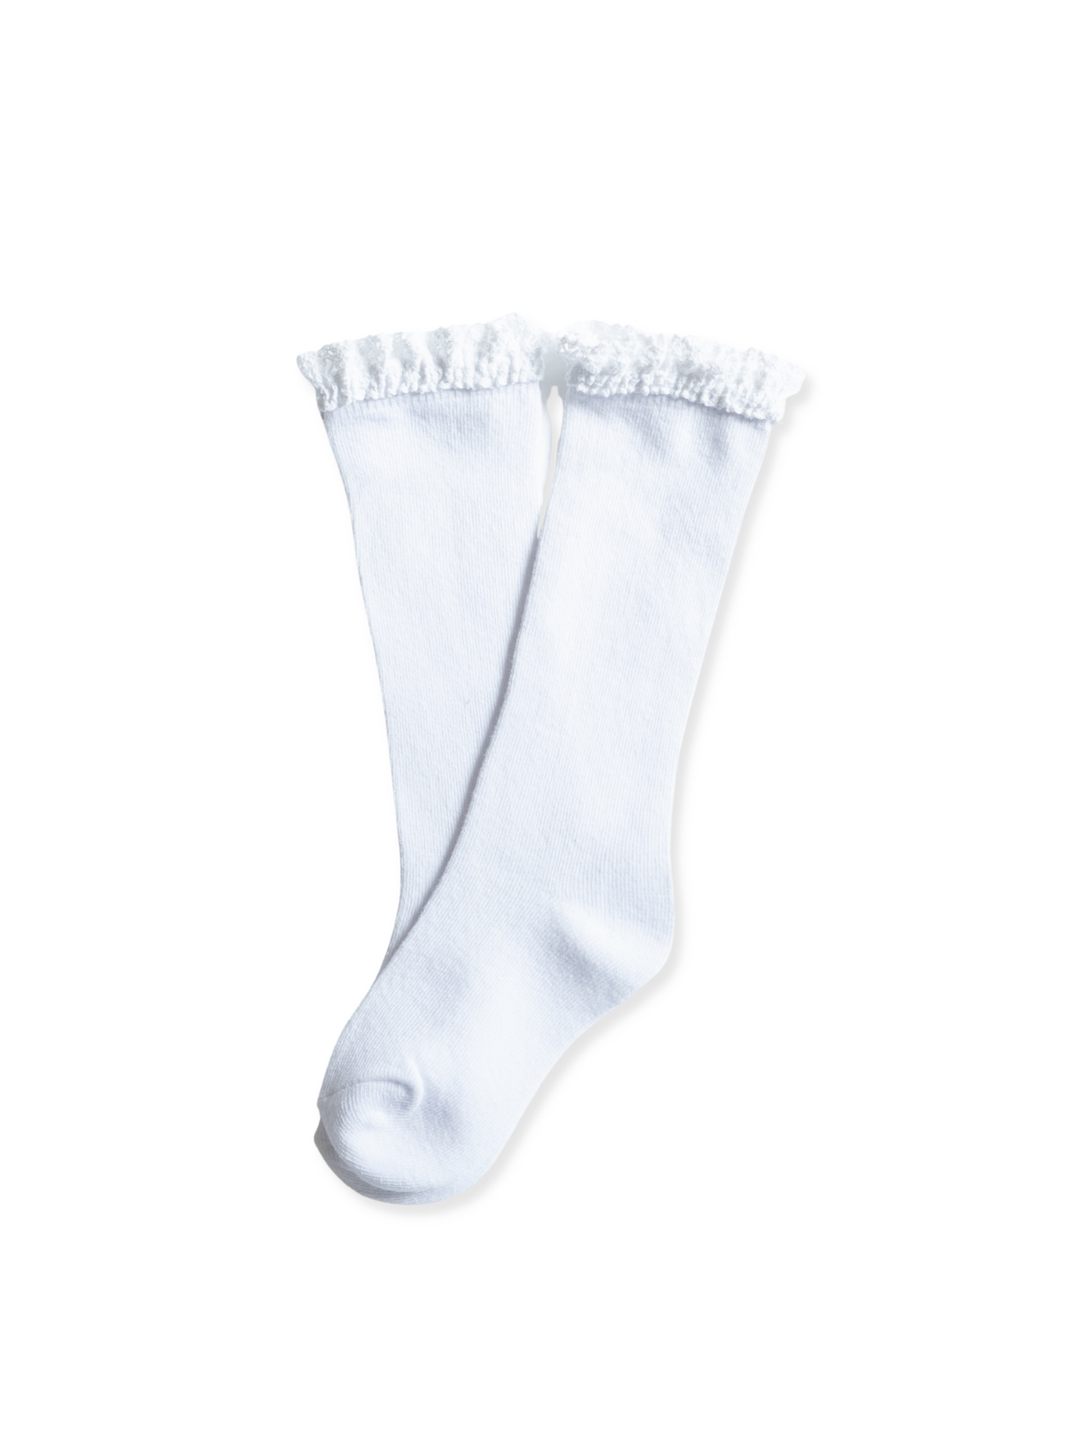 Lace Top Knee High Socks - White | Little Stocking Co.